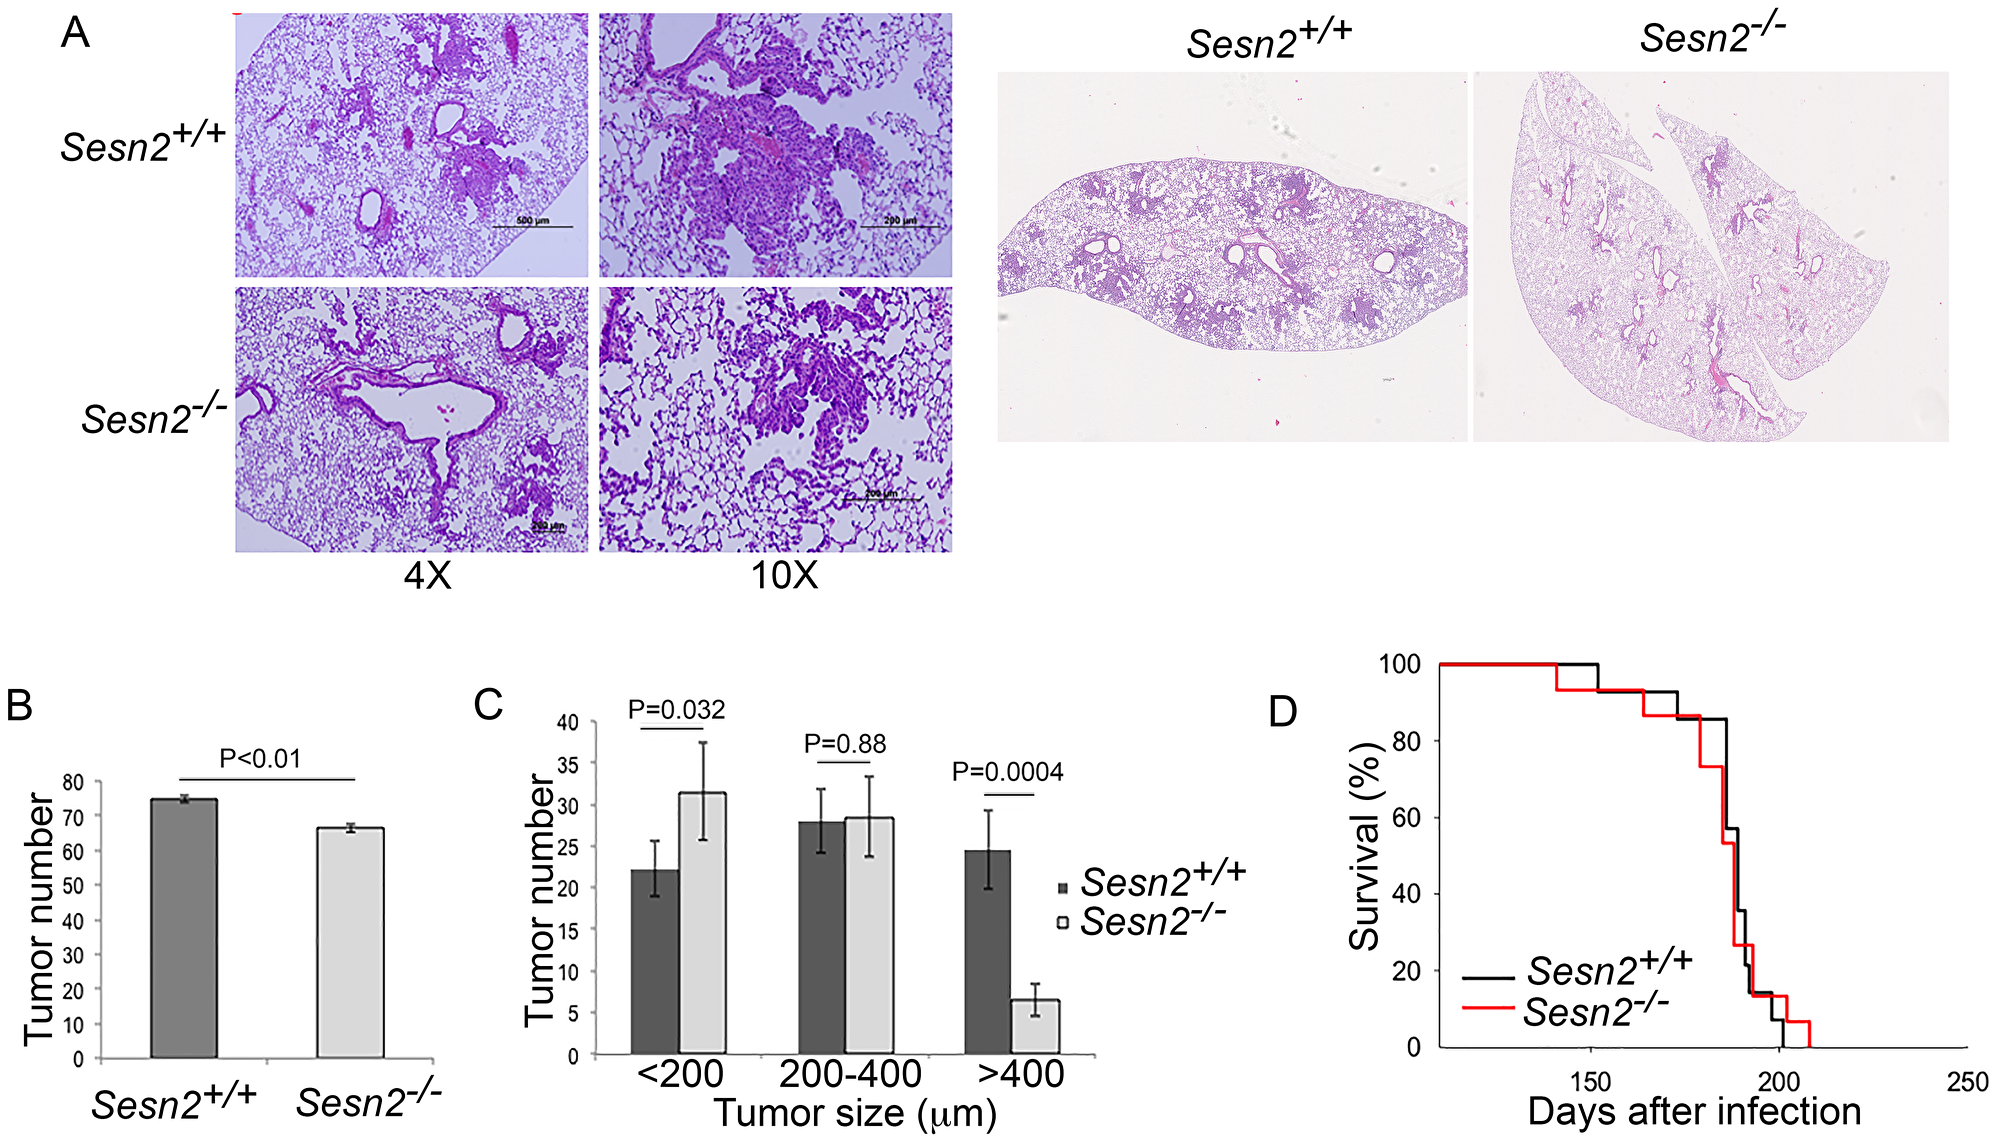 Sesn2 inactivation does not affect tumor initiation and life expectancy in tumor-bearing mice but slows down tumor growth.